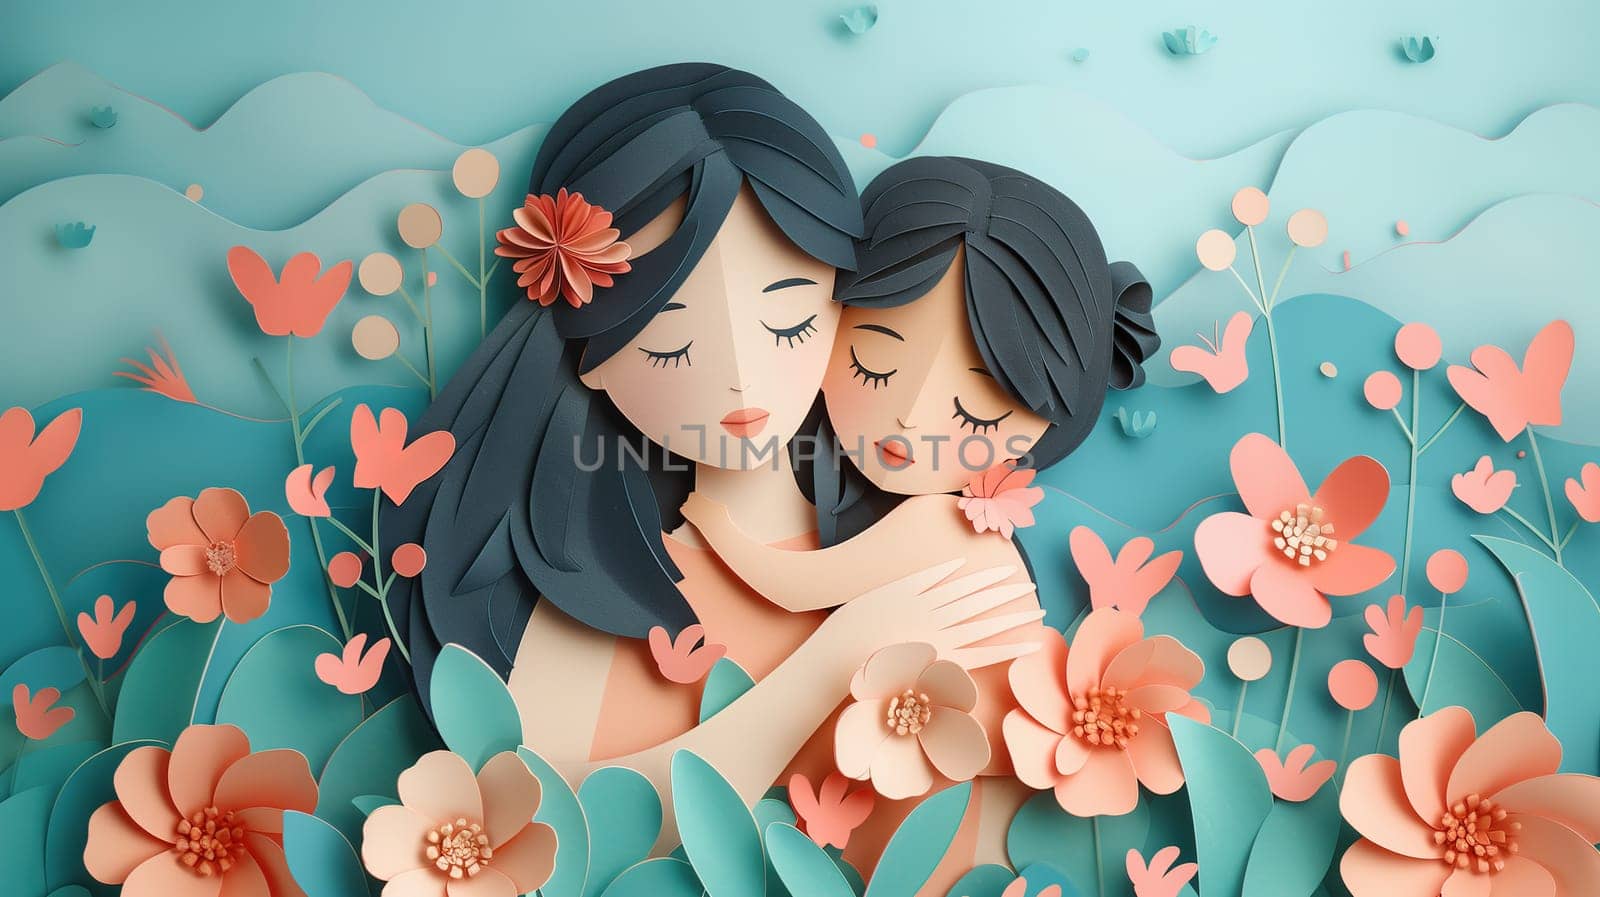 Two women are embracing each other warmly amidst a vibrant field of colorful flowers. The bright petals create a beautiful backdrop for their heartfelt moment.